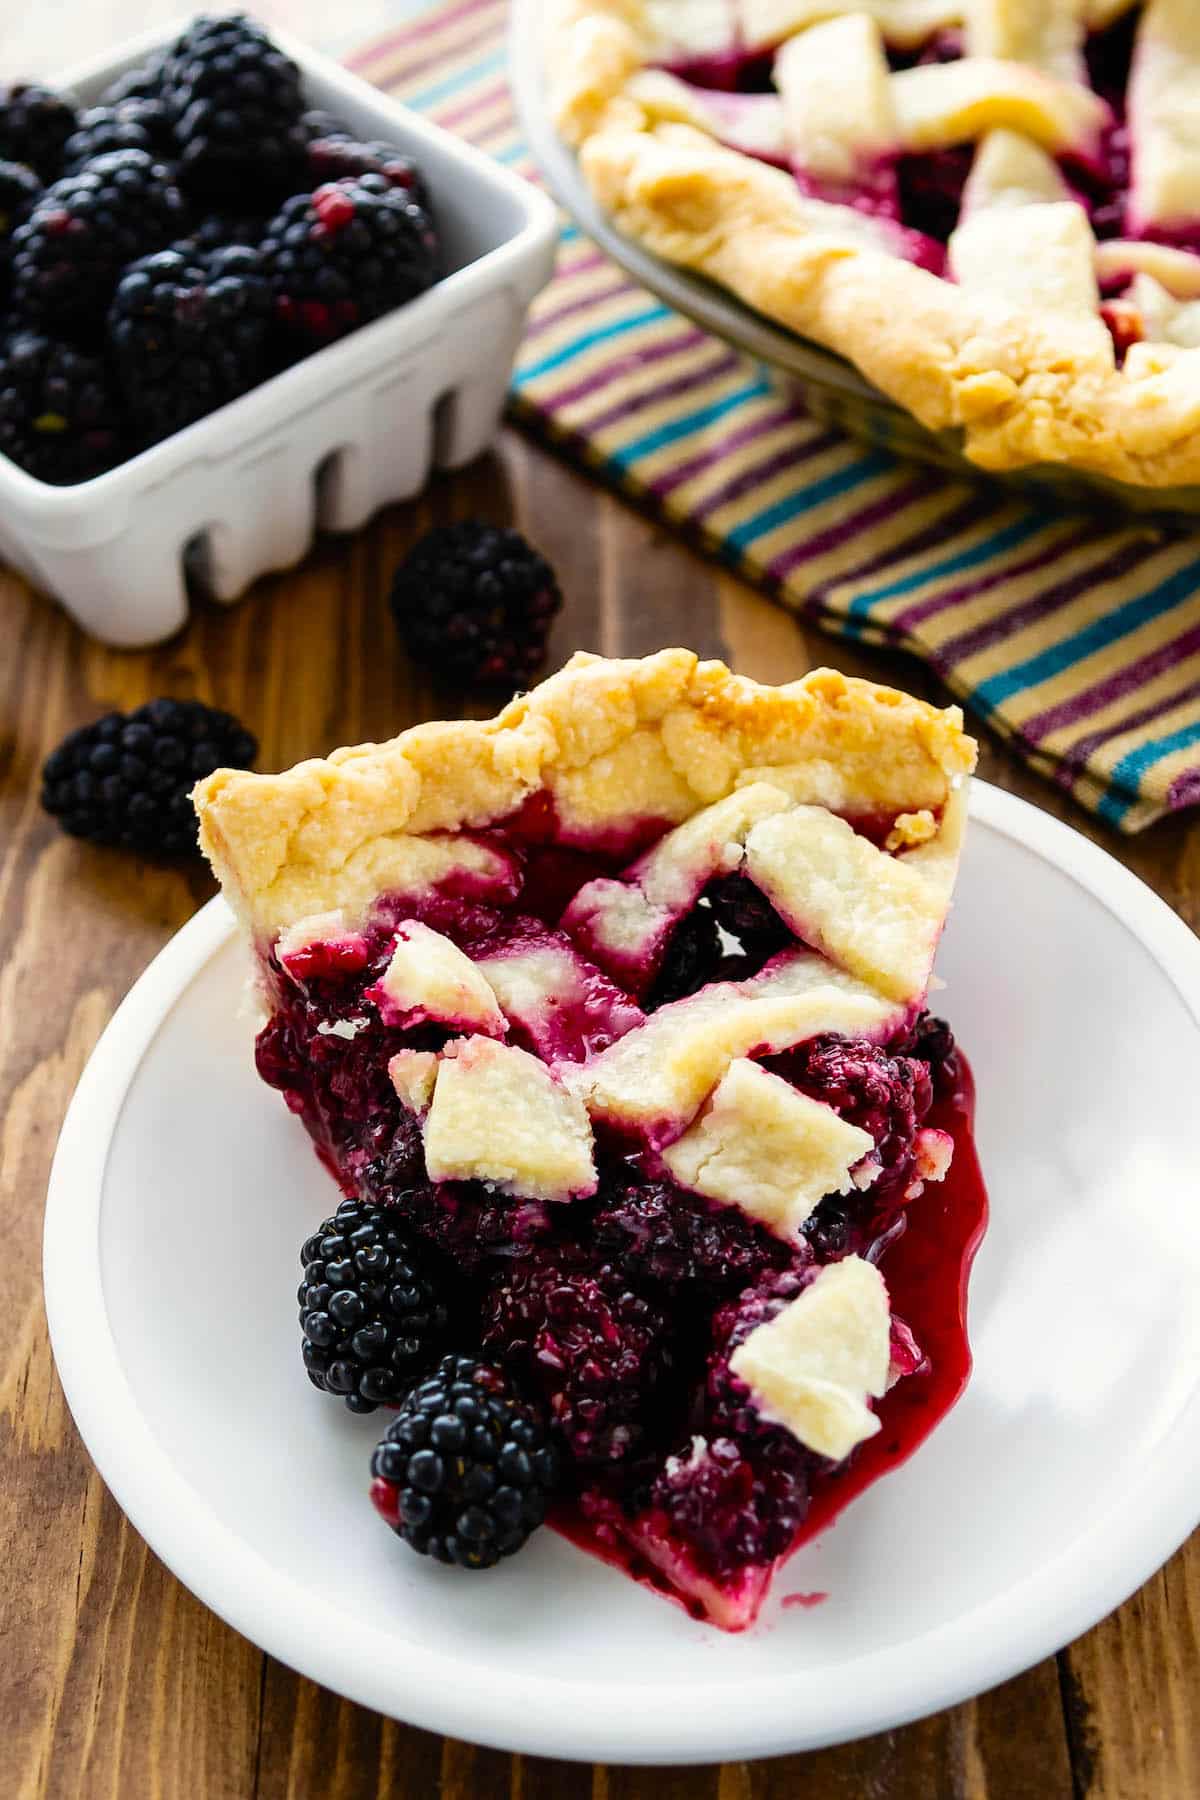 slice of blackberry pie with lattice crust on white plate on brown surface.